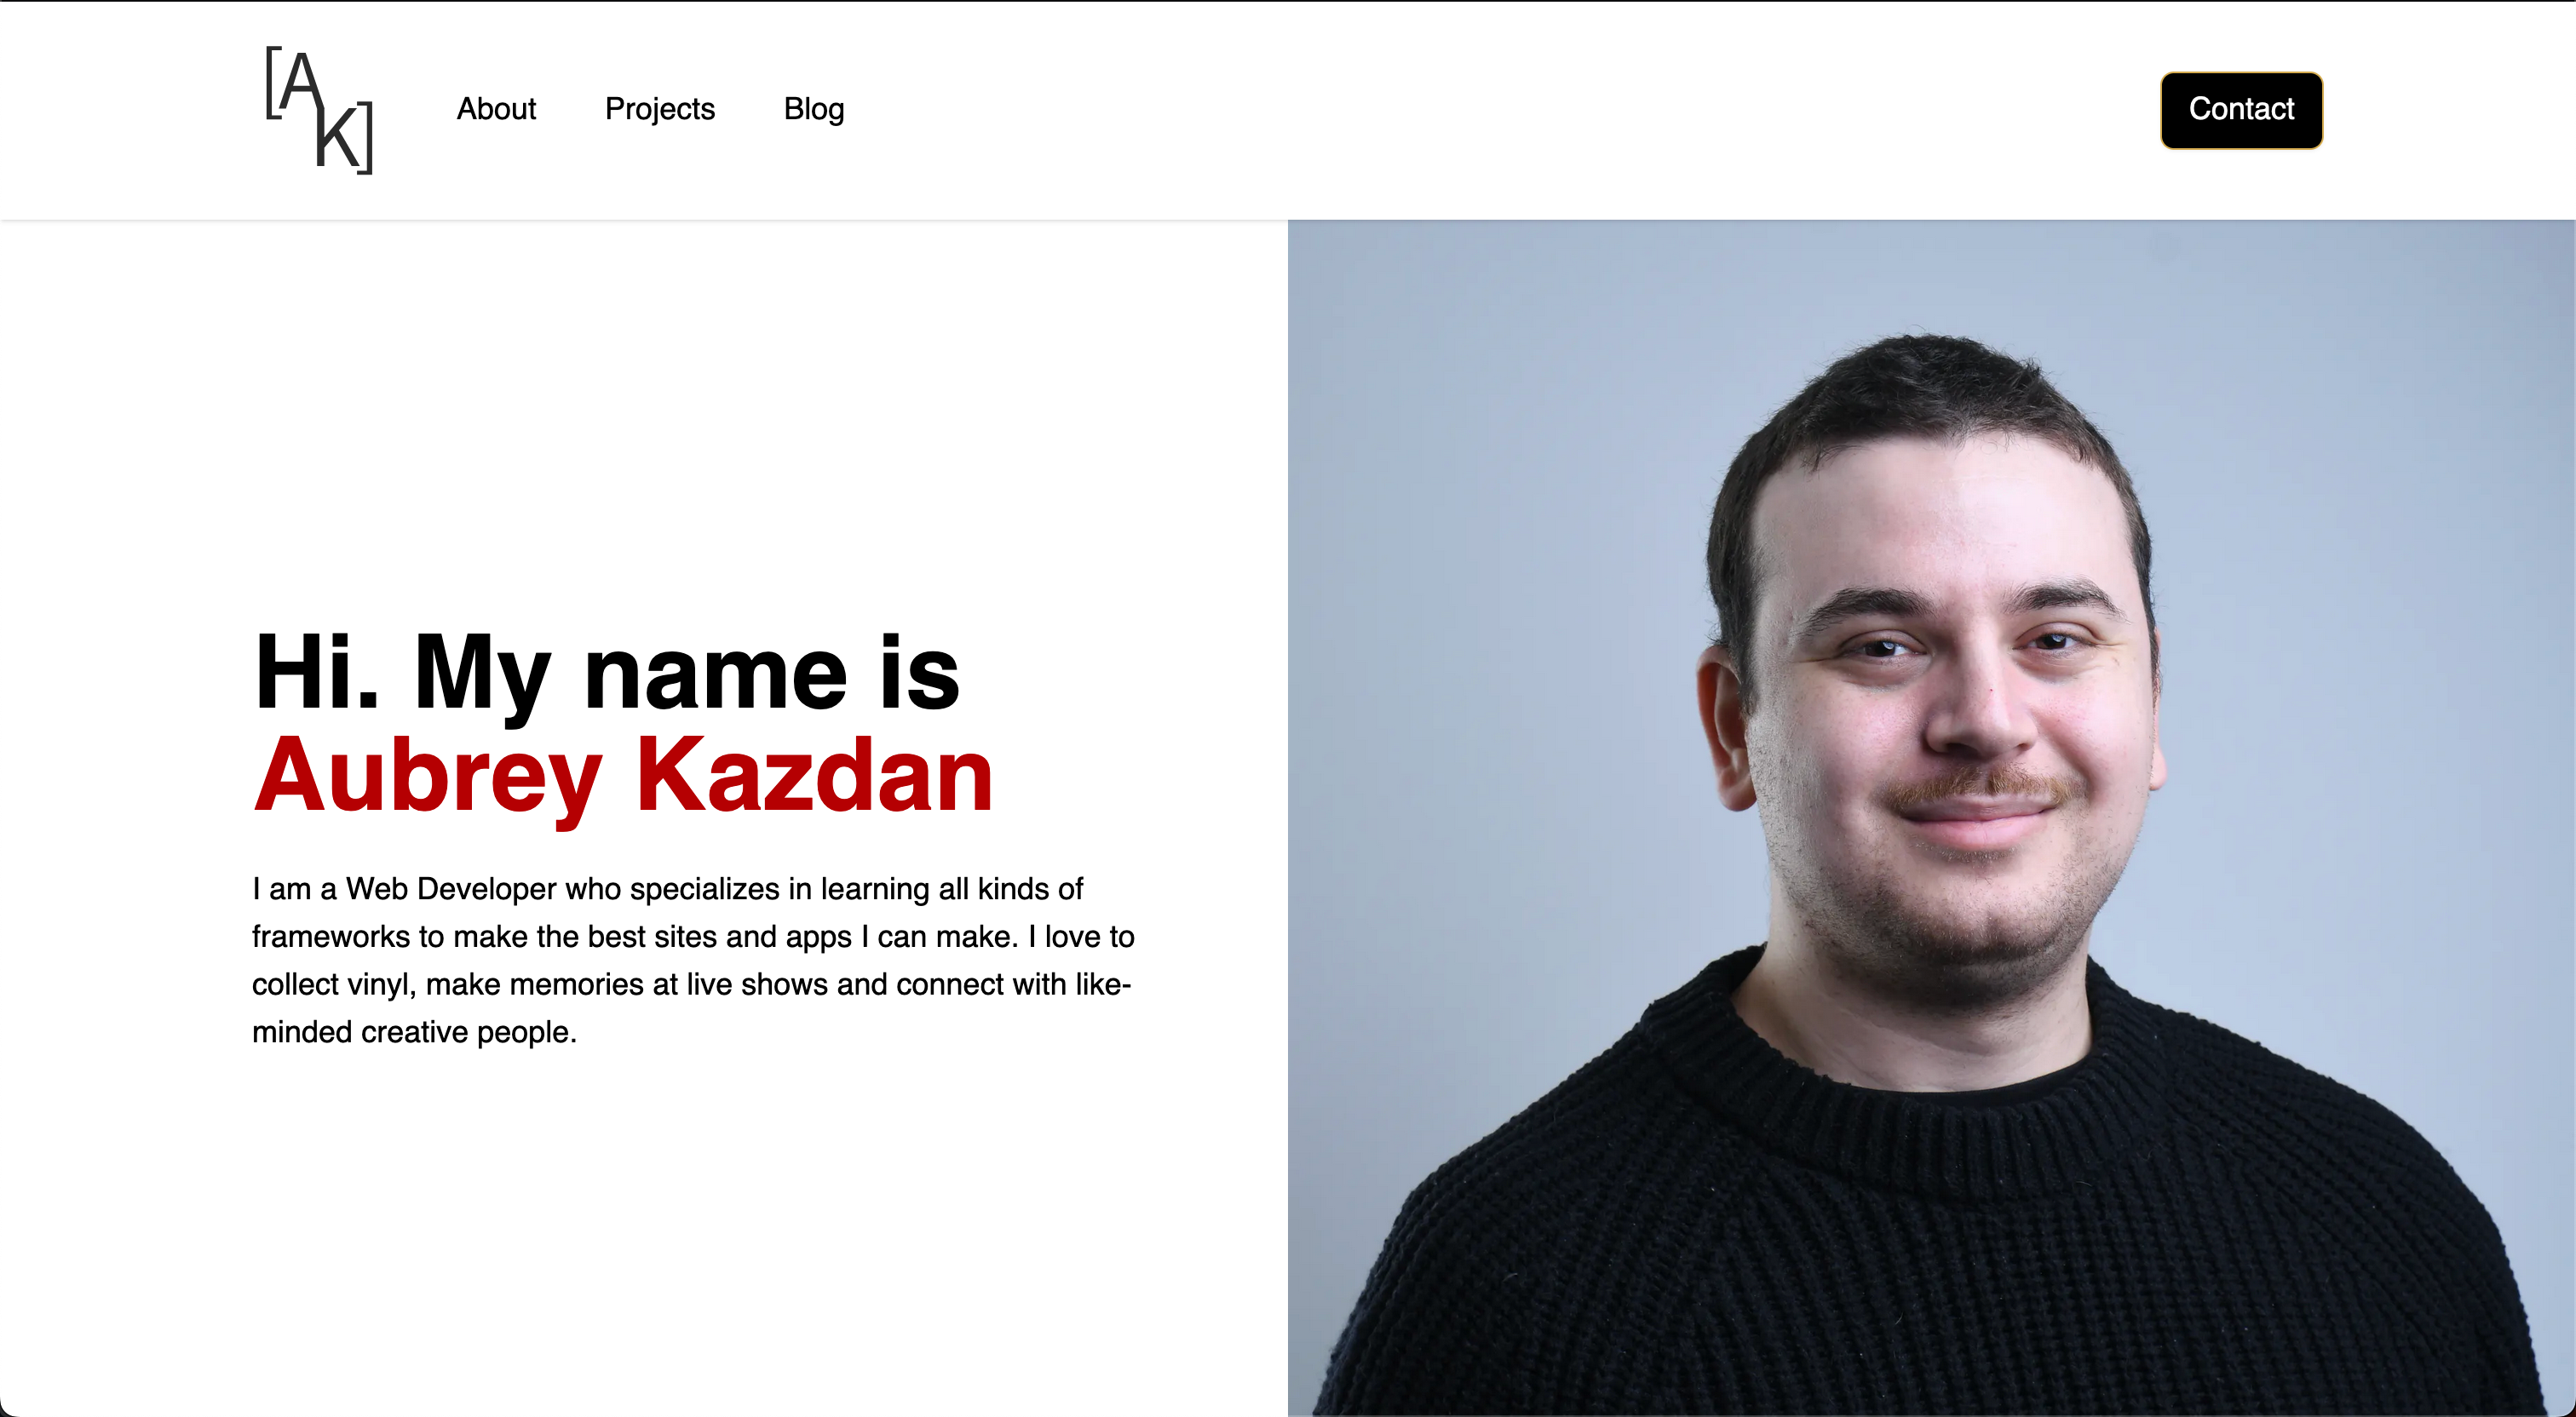 Landing page for Aubrey Kazdan's portfolio with introductory text and an image of Aubrey